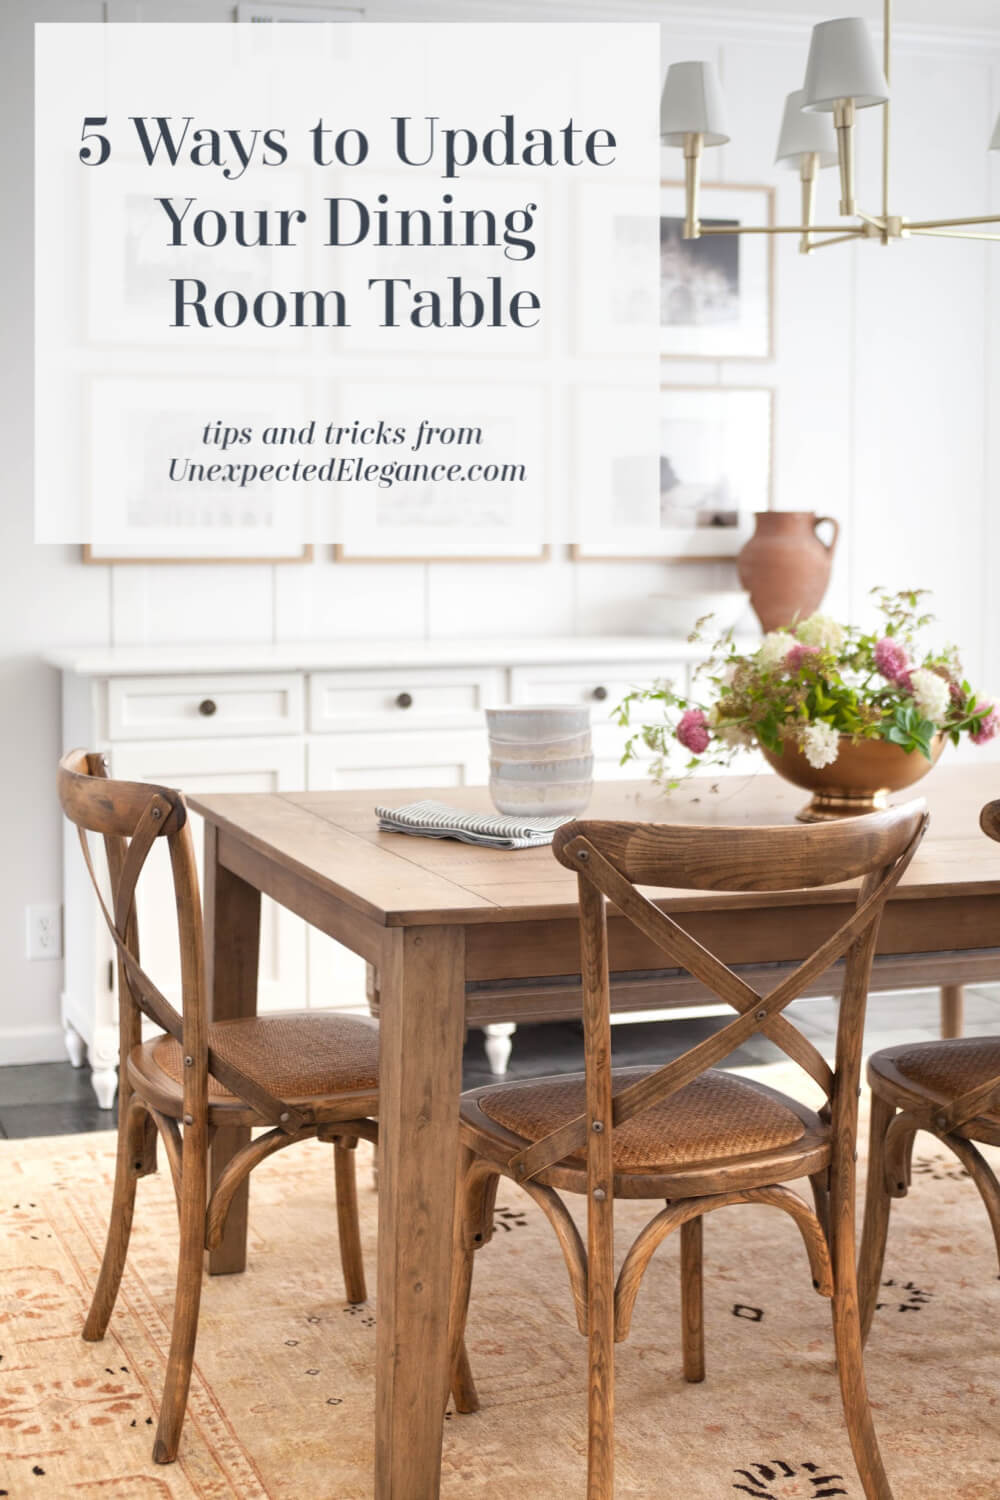 5 Ways to Update Your Dining Room Table